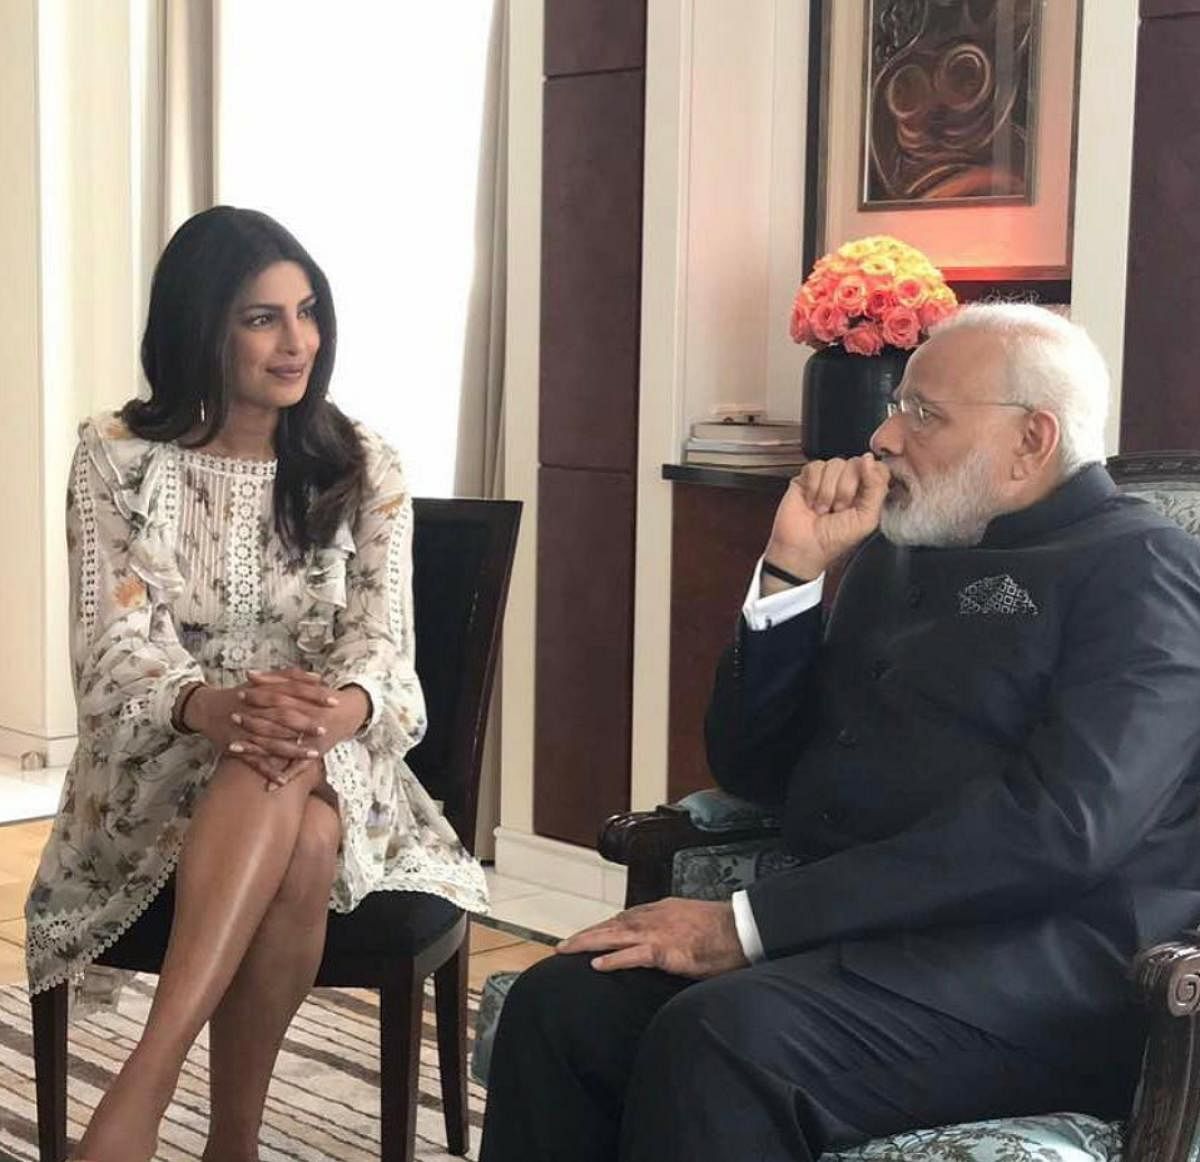 Many criticised movie star Priyanka Chopra for wearing a short dress when she went to met Prime Minister Modi in May 2017.